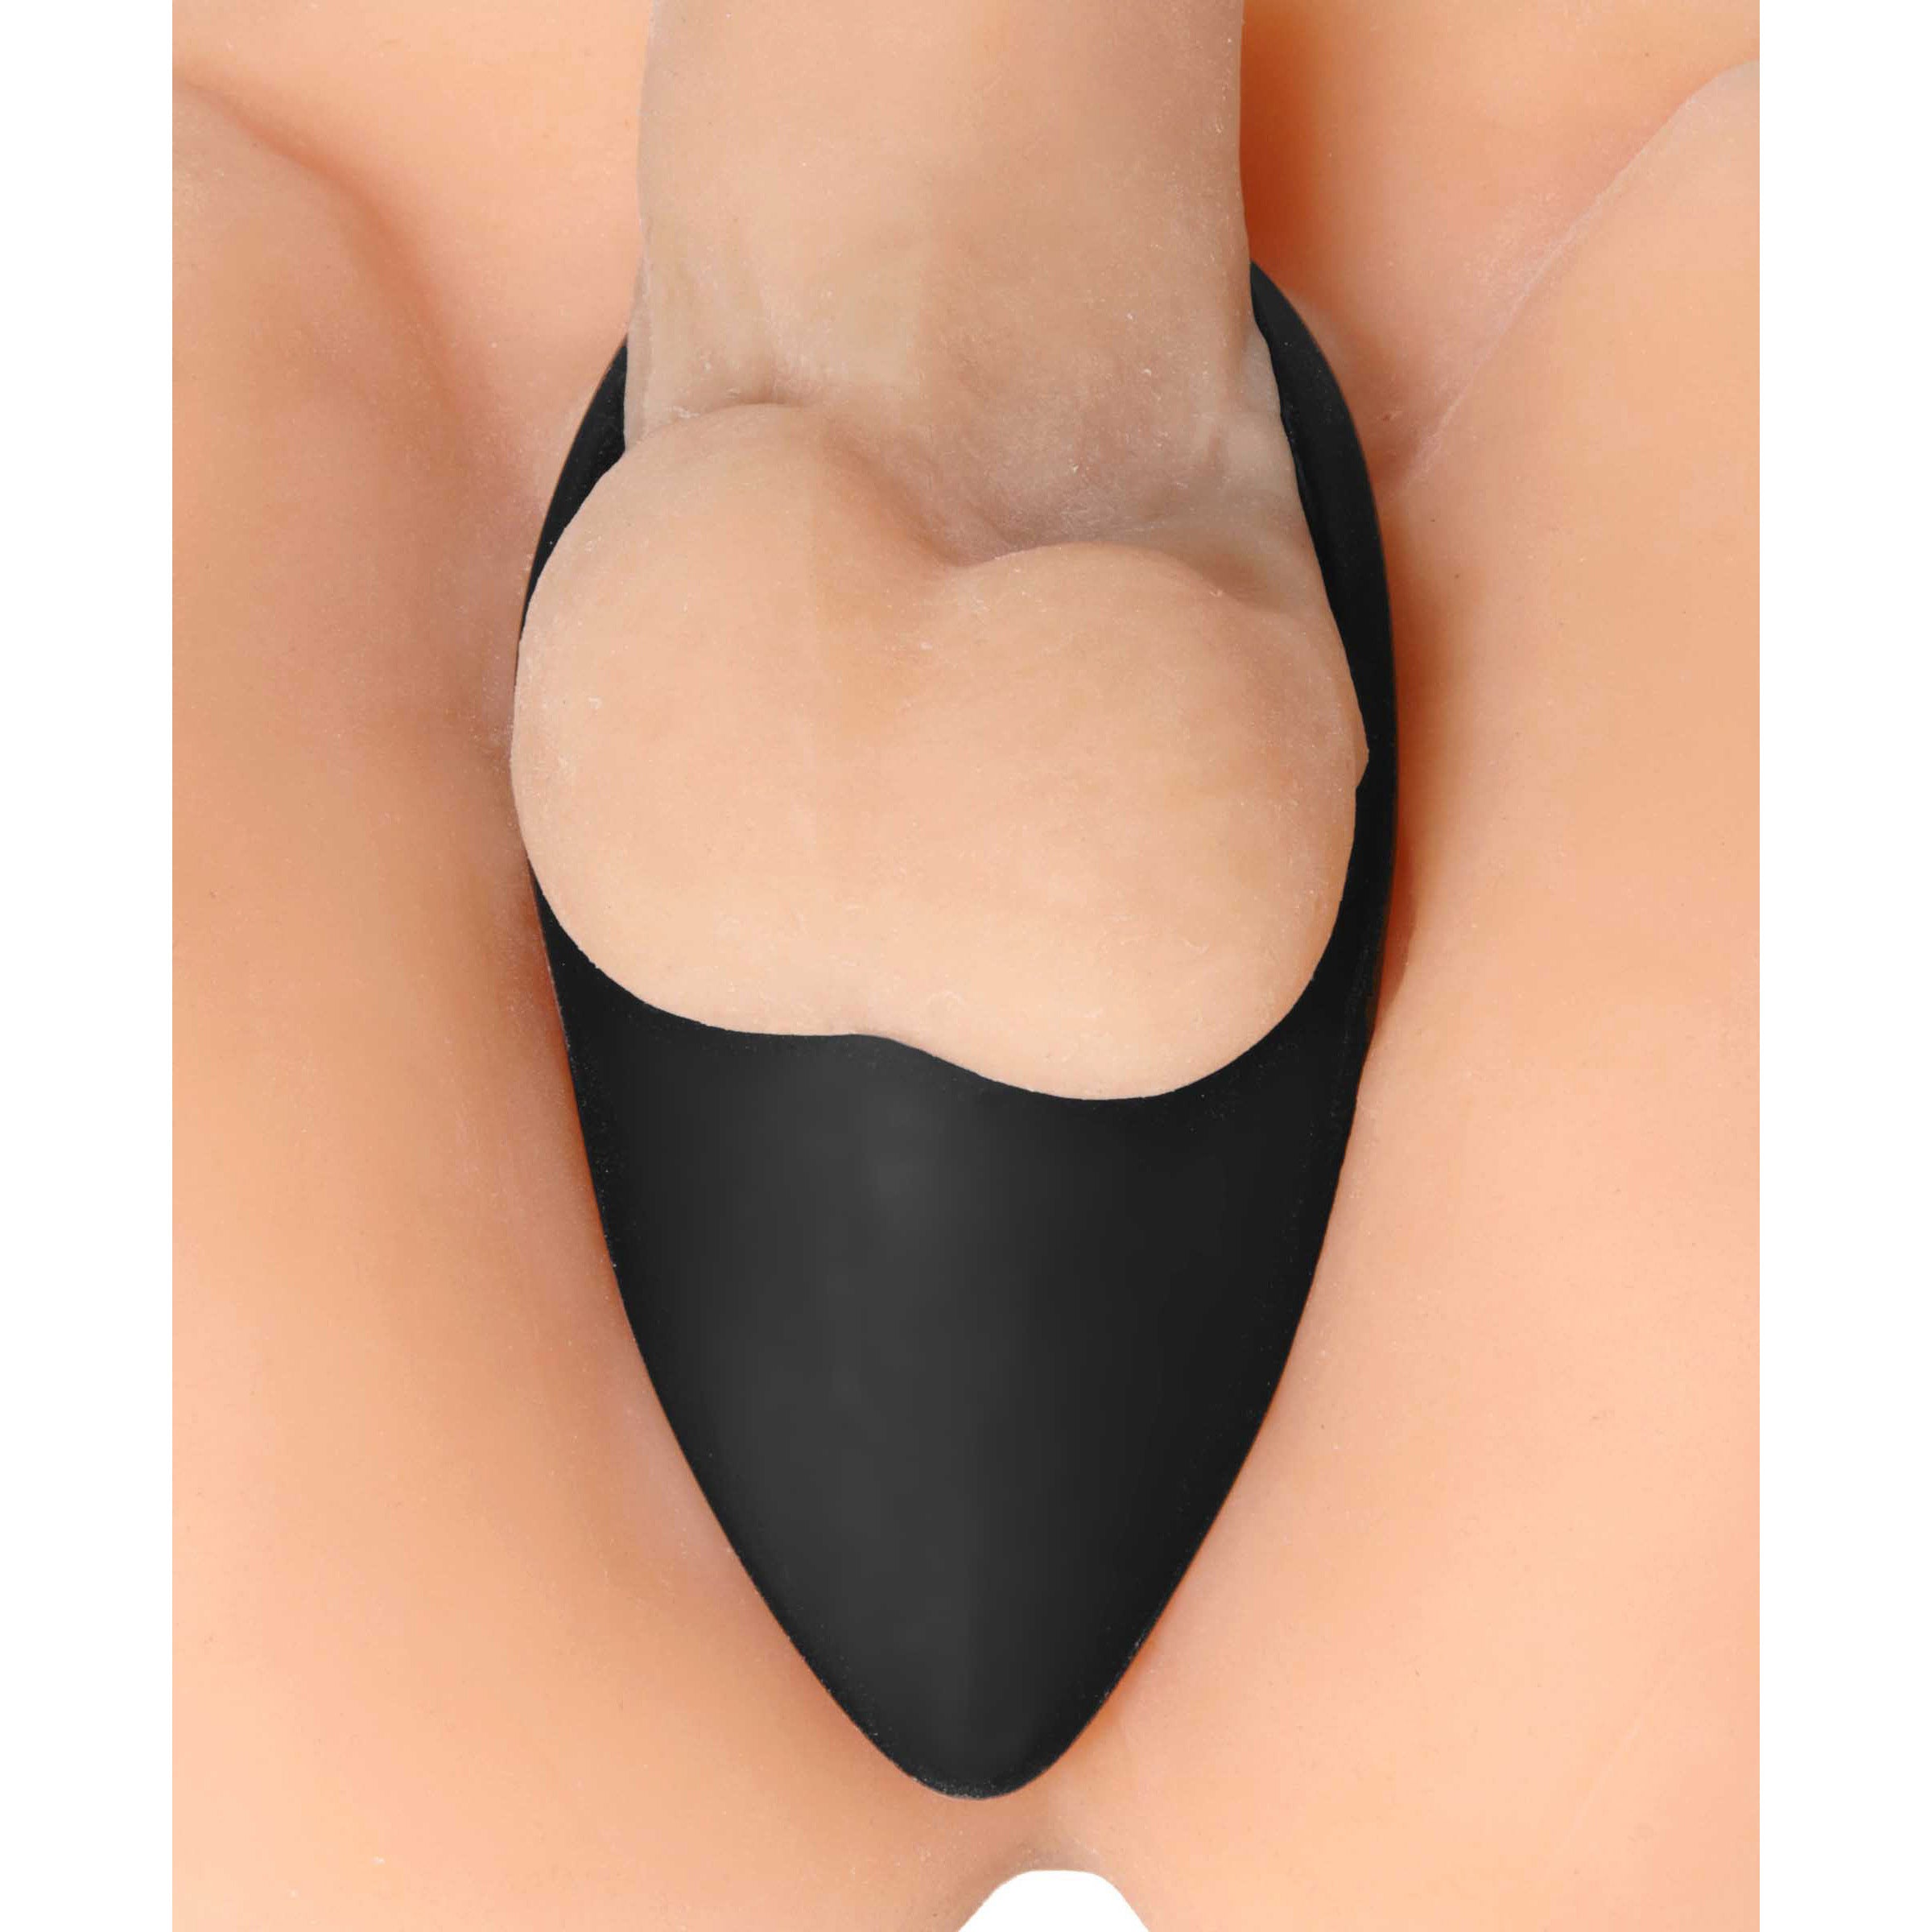 Taint Teaser Silicone Cock Ring and Taint Stimulator